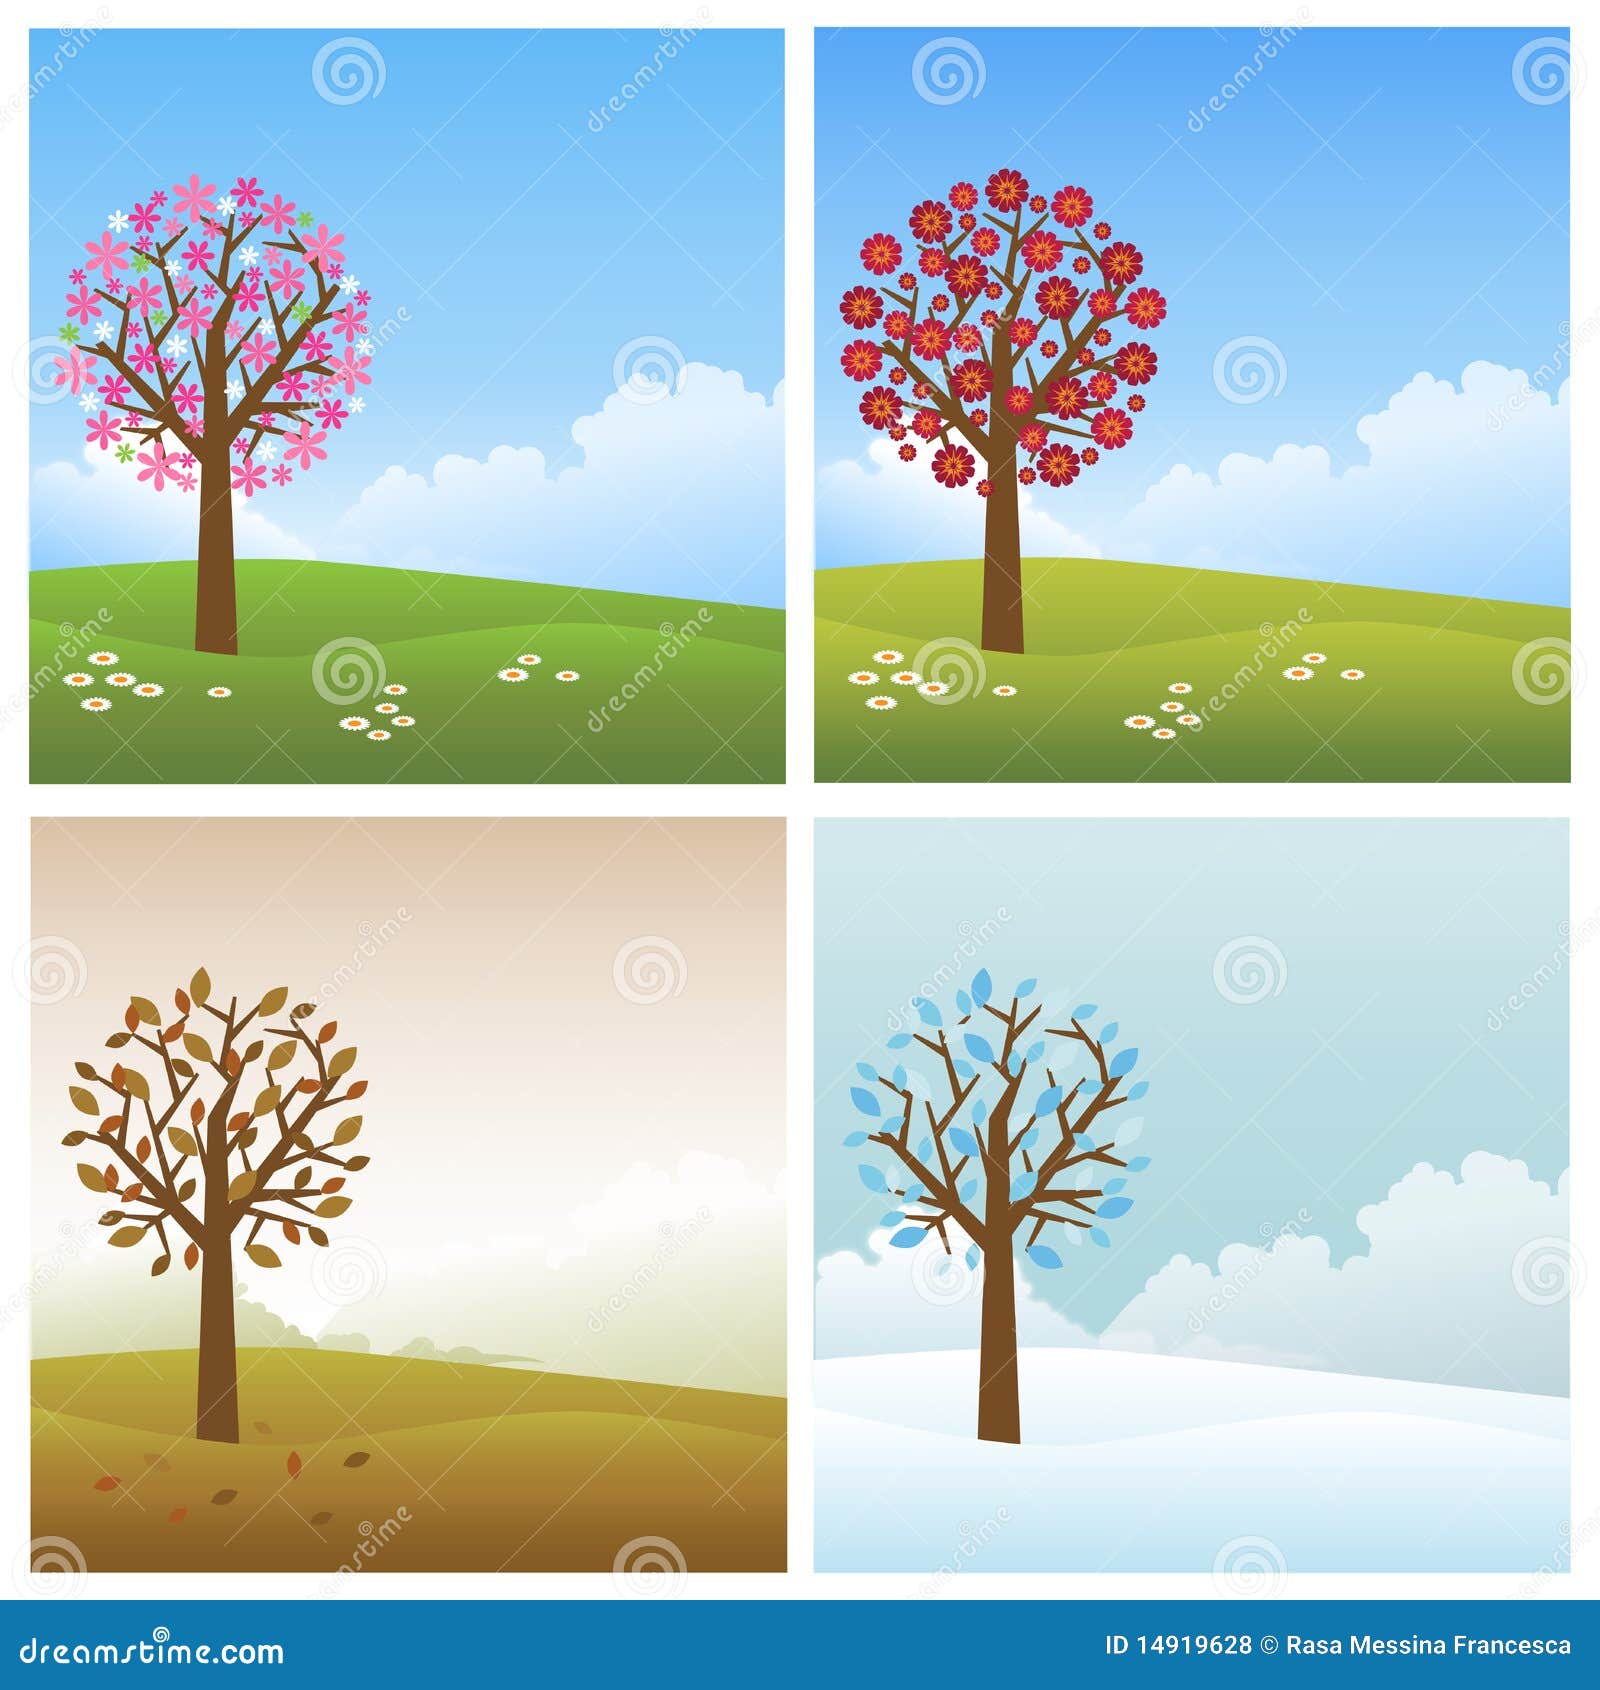 four seasons backgrounds